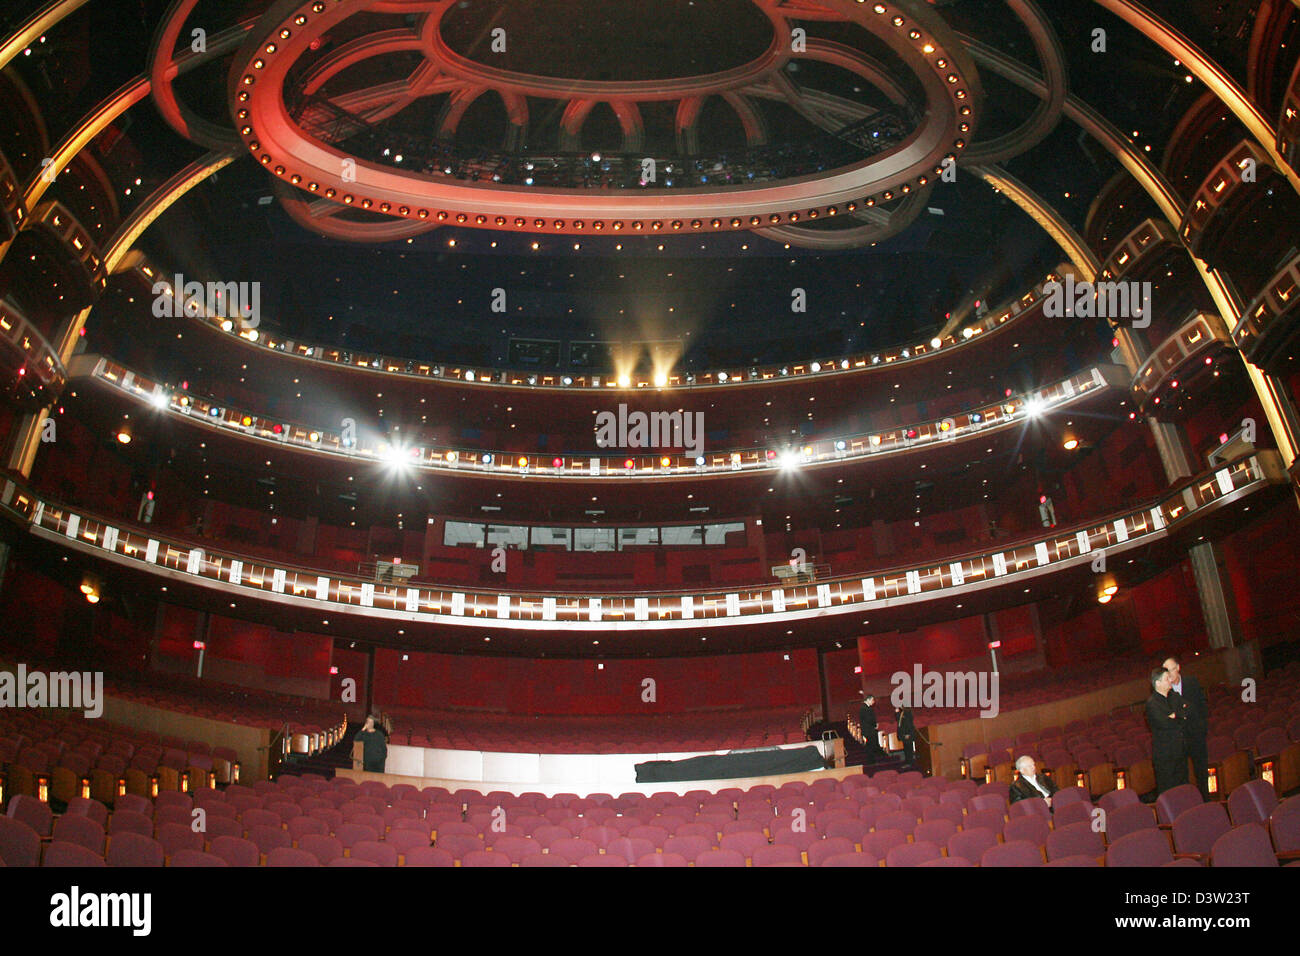 The photo shows the interior of the Kodak Theatre on the famous Hollywood Boulevard ('Walk of Fame') in Hollywood, Los Angeles, USA, 28 November 2006. The Oscar award ceremonies take place at the Kodak Theatre every year. Photo: Uli Deck Stock Photo